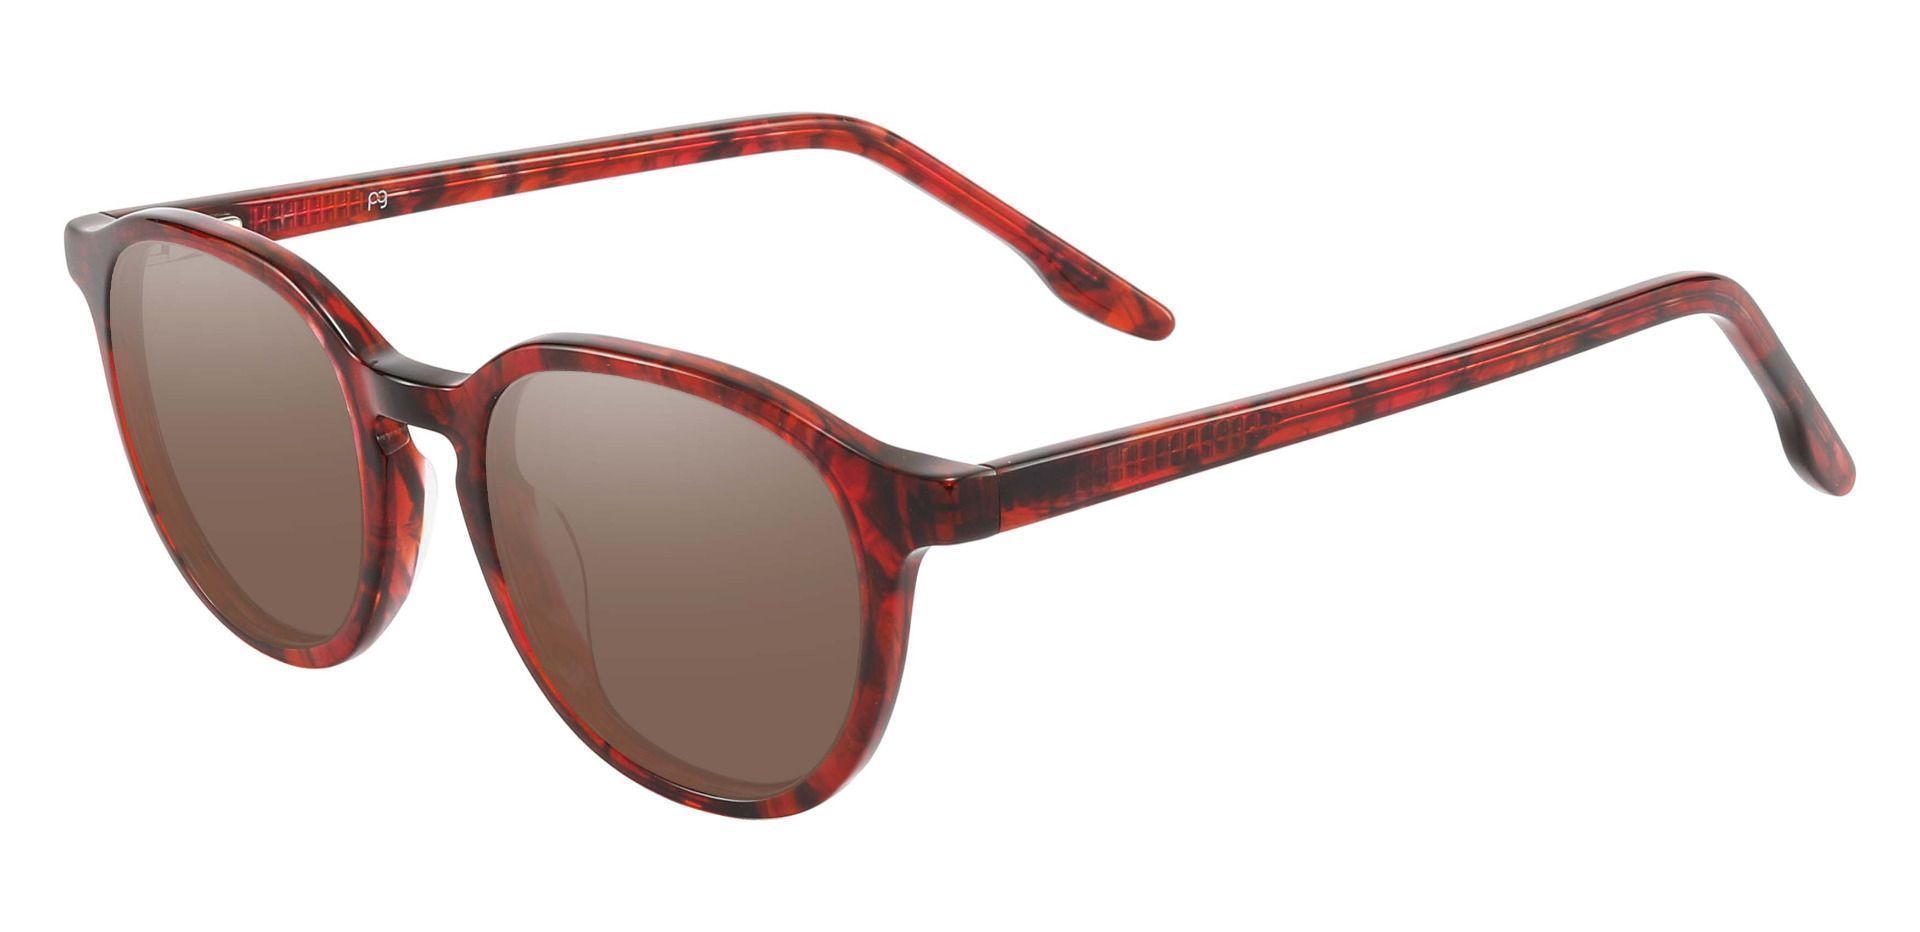 Ashley Oval Non-Rx Sunglasses - Red Frame With Brown Lenses